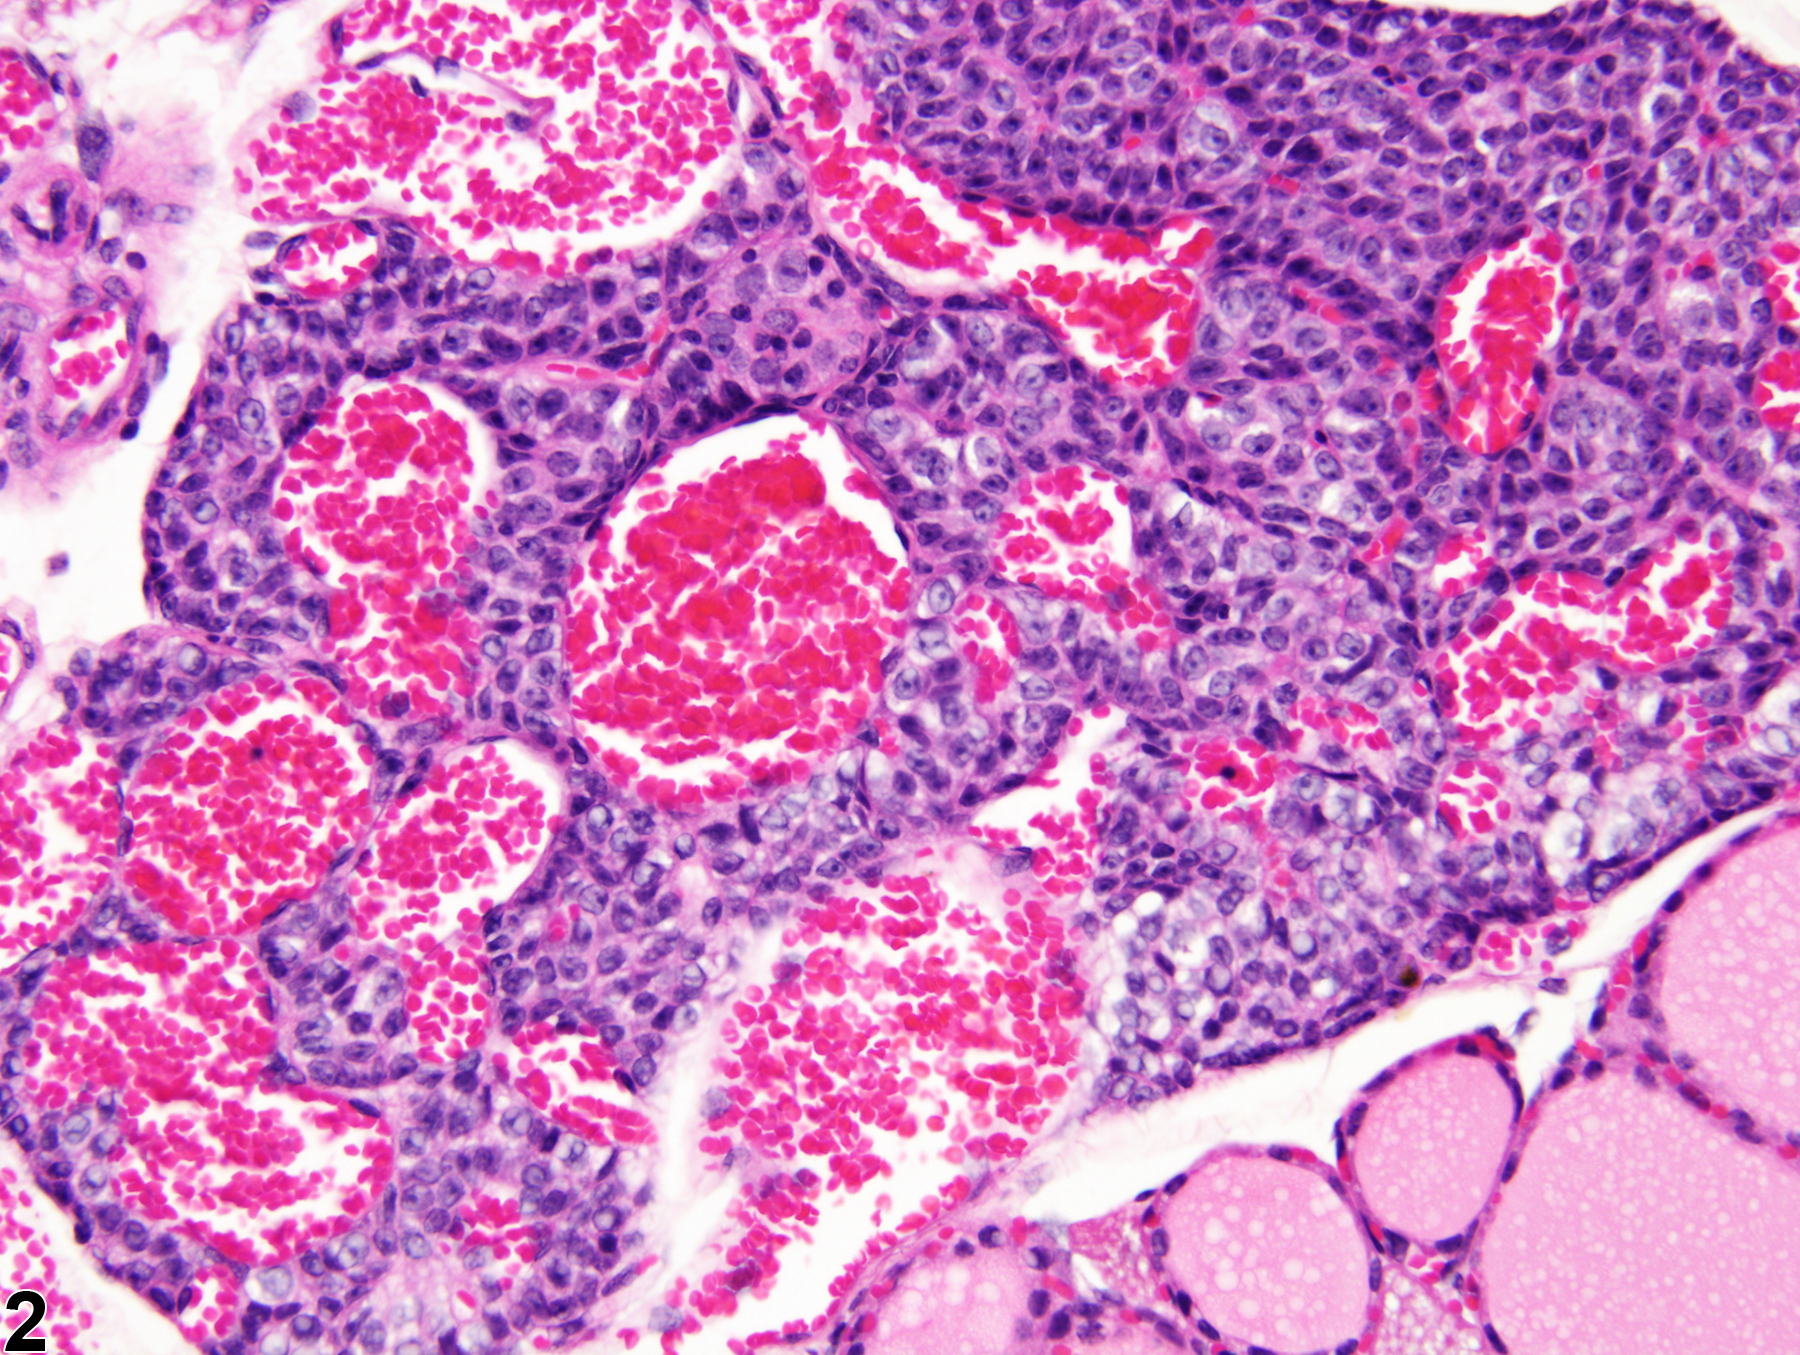 Image of angiectasis in the parathyroid gland from a male BALB/c mouse in a subchronic study